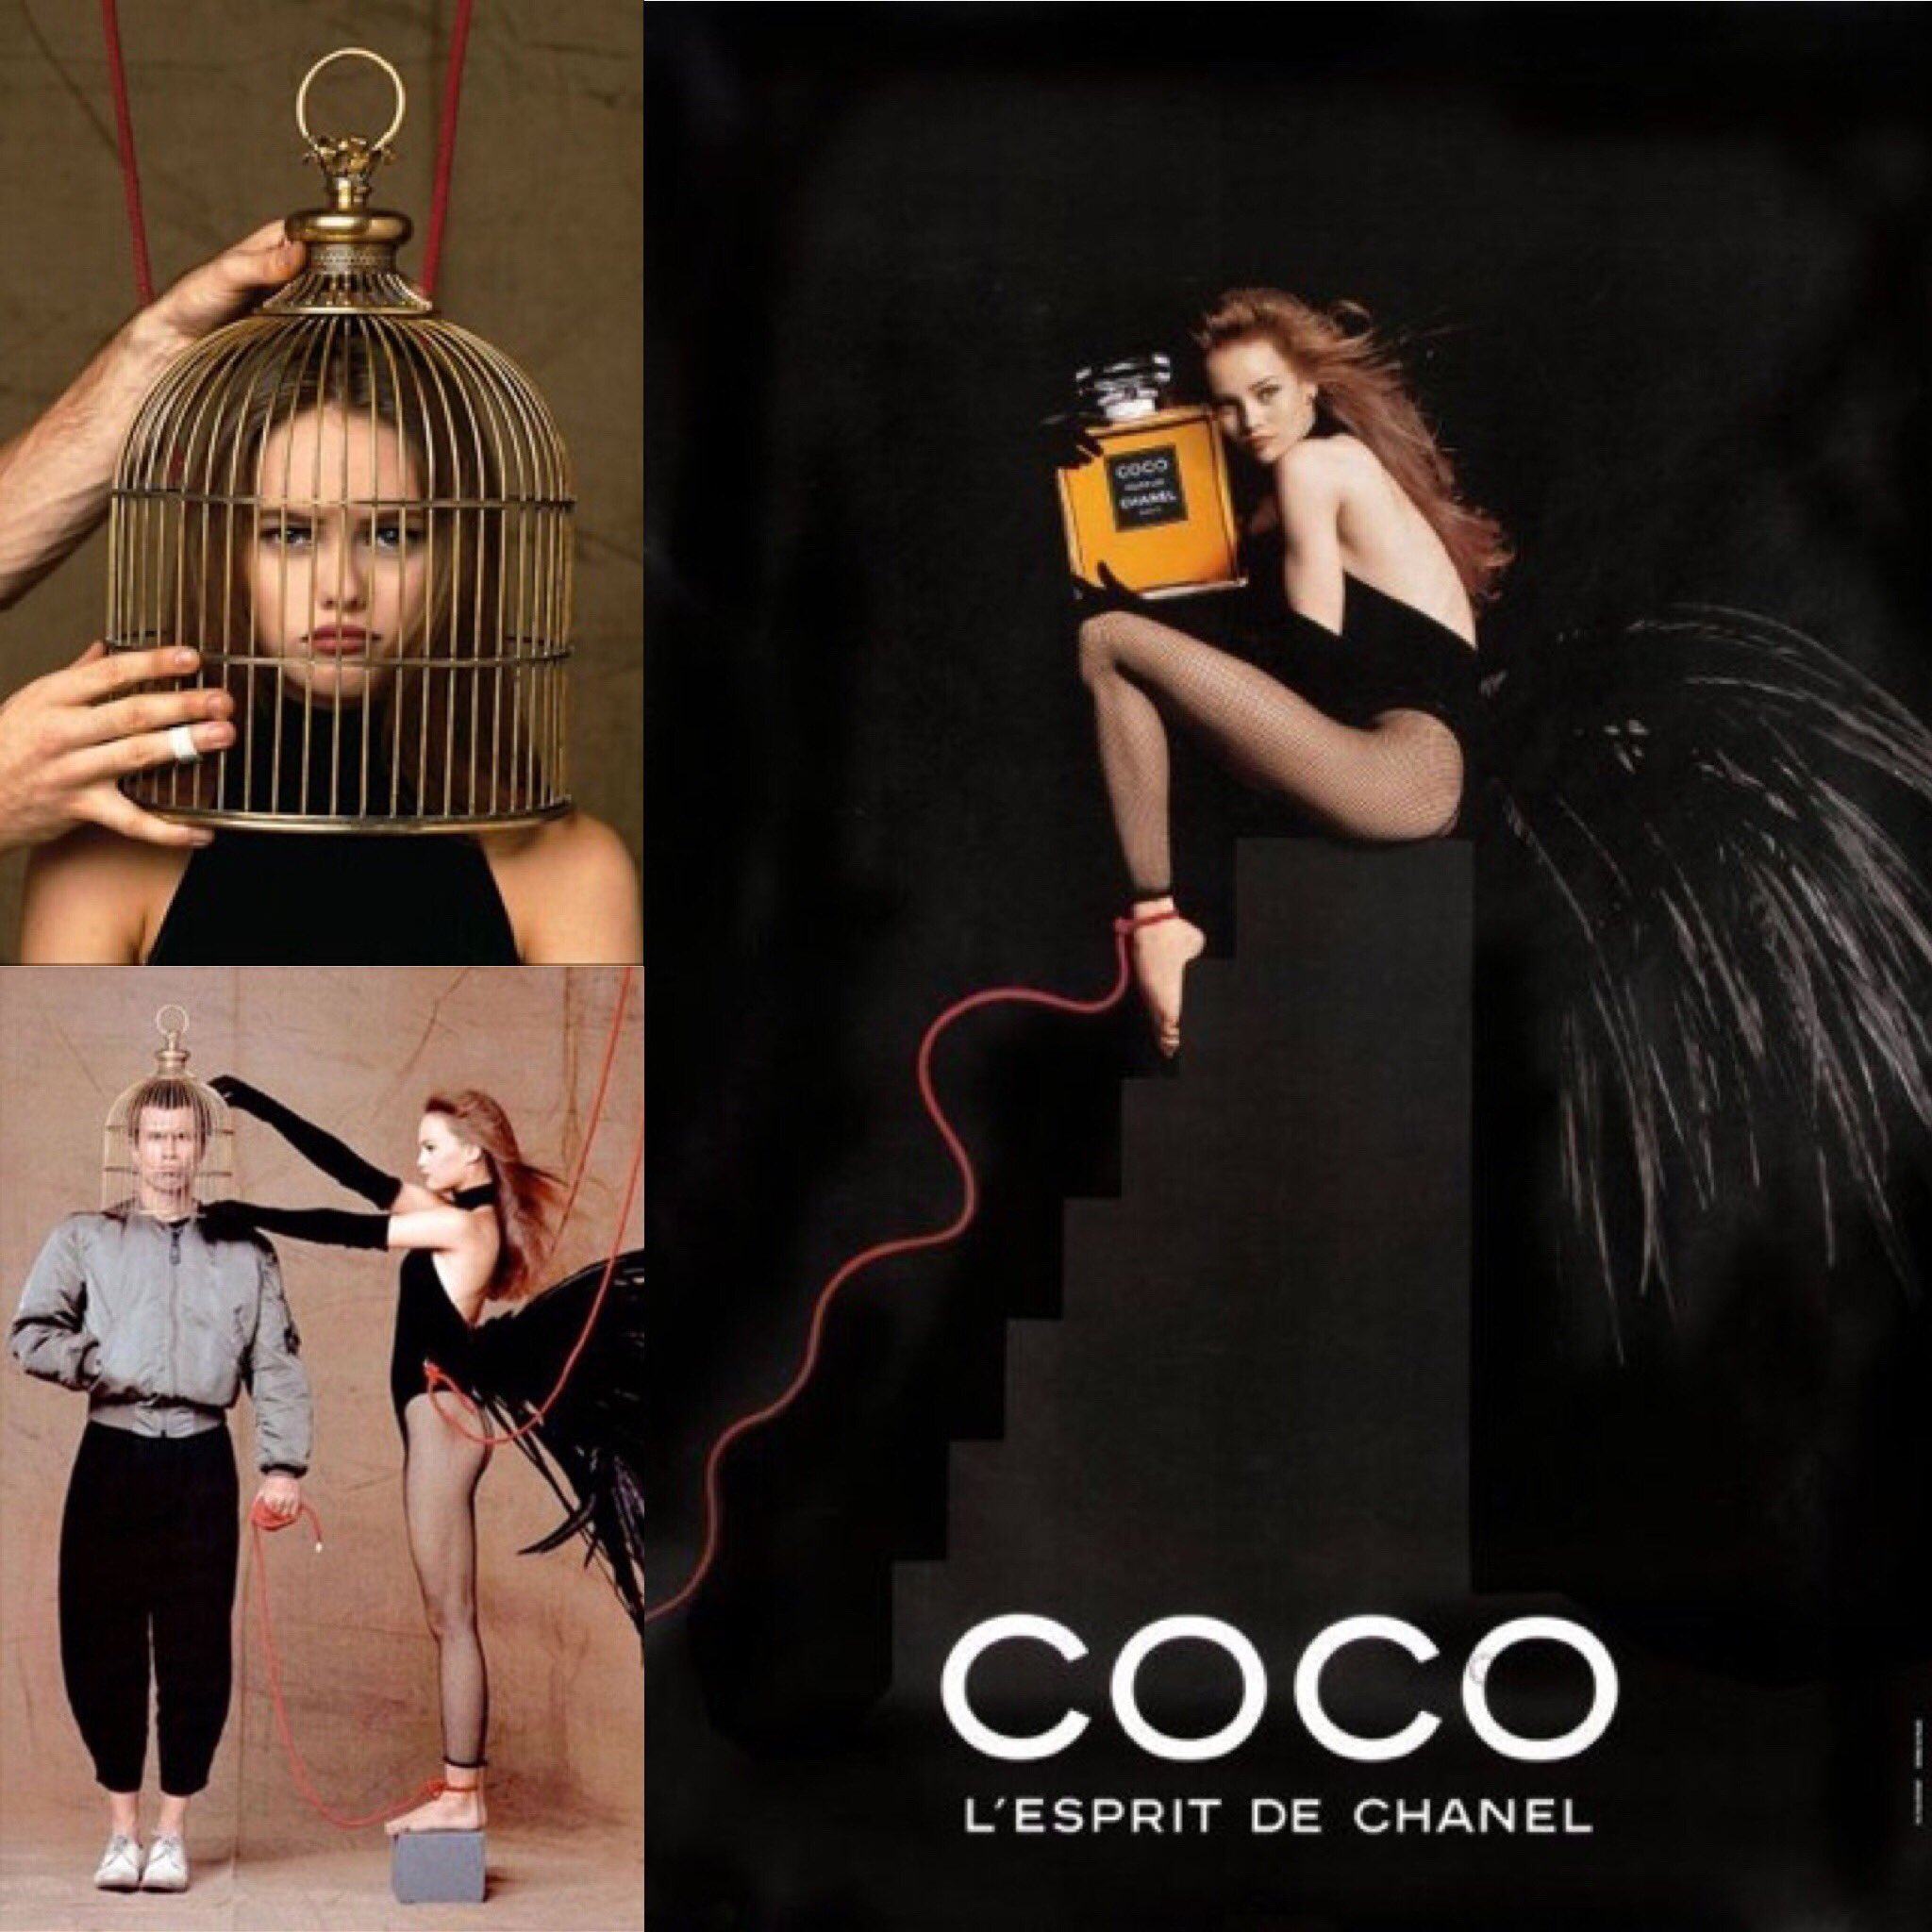 COCO, the 1991 Film with Vanessa Paradis – CHANEL Fragrance 